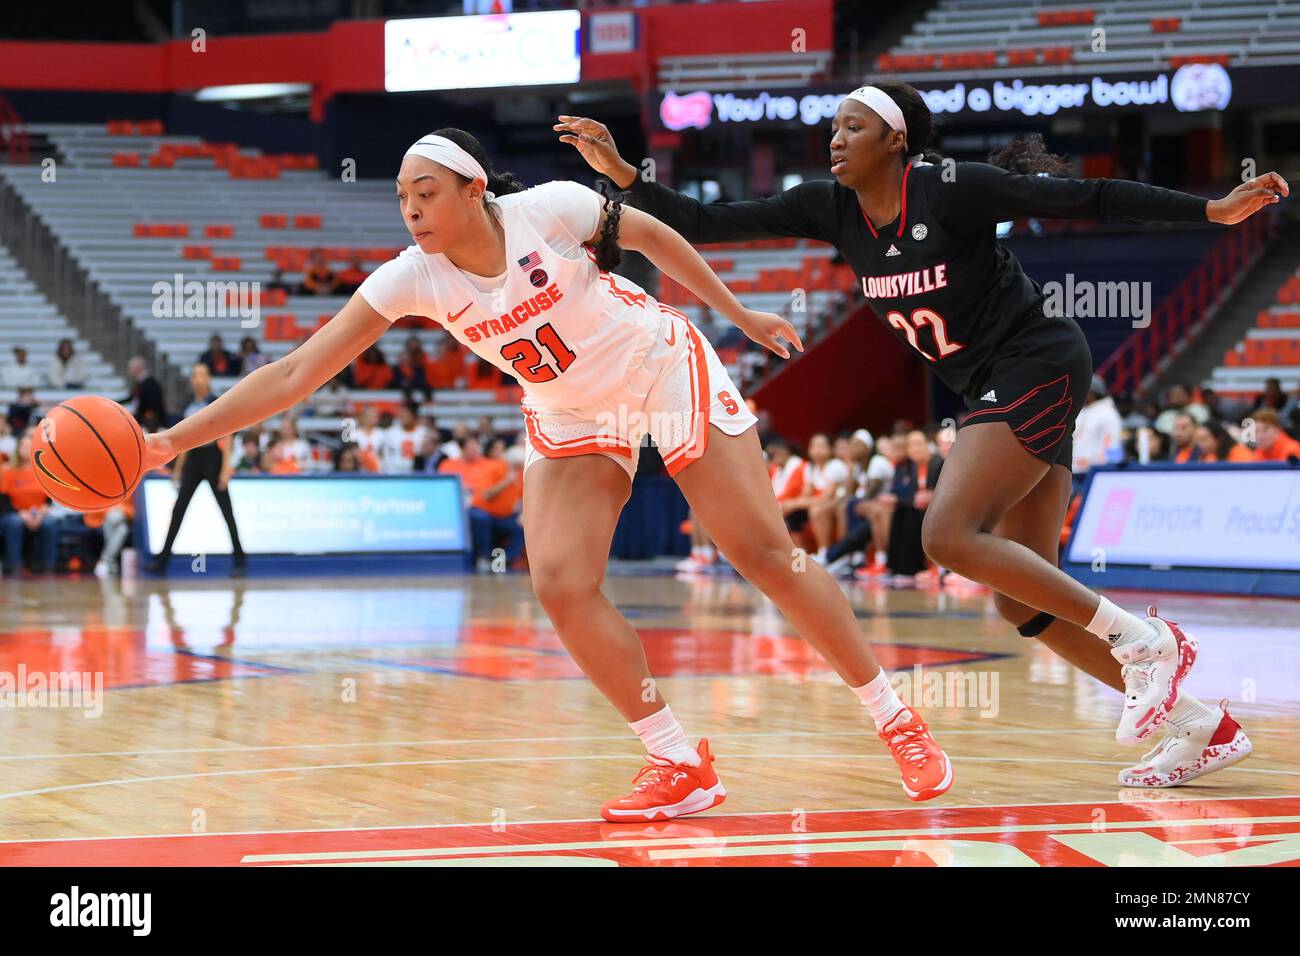 January 29, 2023: Syracuse Orange forward Saniaa Wilson (21) reaches for a loose ball as Louisville Cardinals forward Liz Dixon (22) defends during the second half of an NCAA WomenÕs basketball game on Sunday Jan. 29, 2023 at the JMA Wireless Dome in Syracuse, New York. Louisville won 79-67. Rich Barnes/CSM Stock Photo